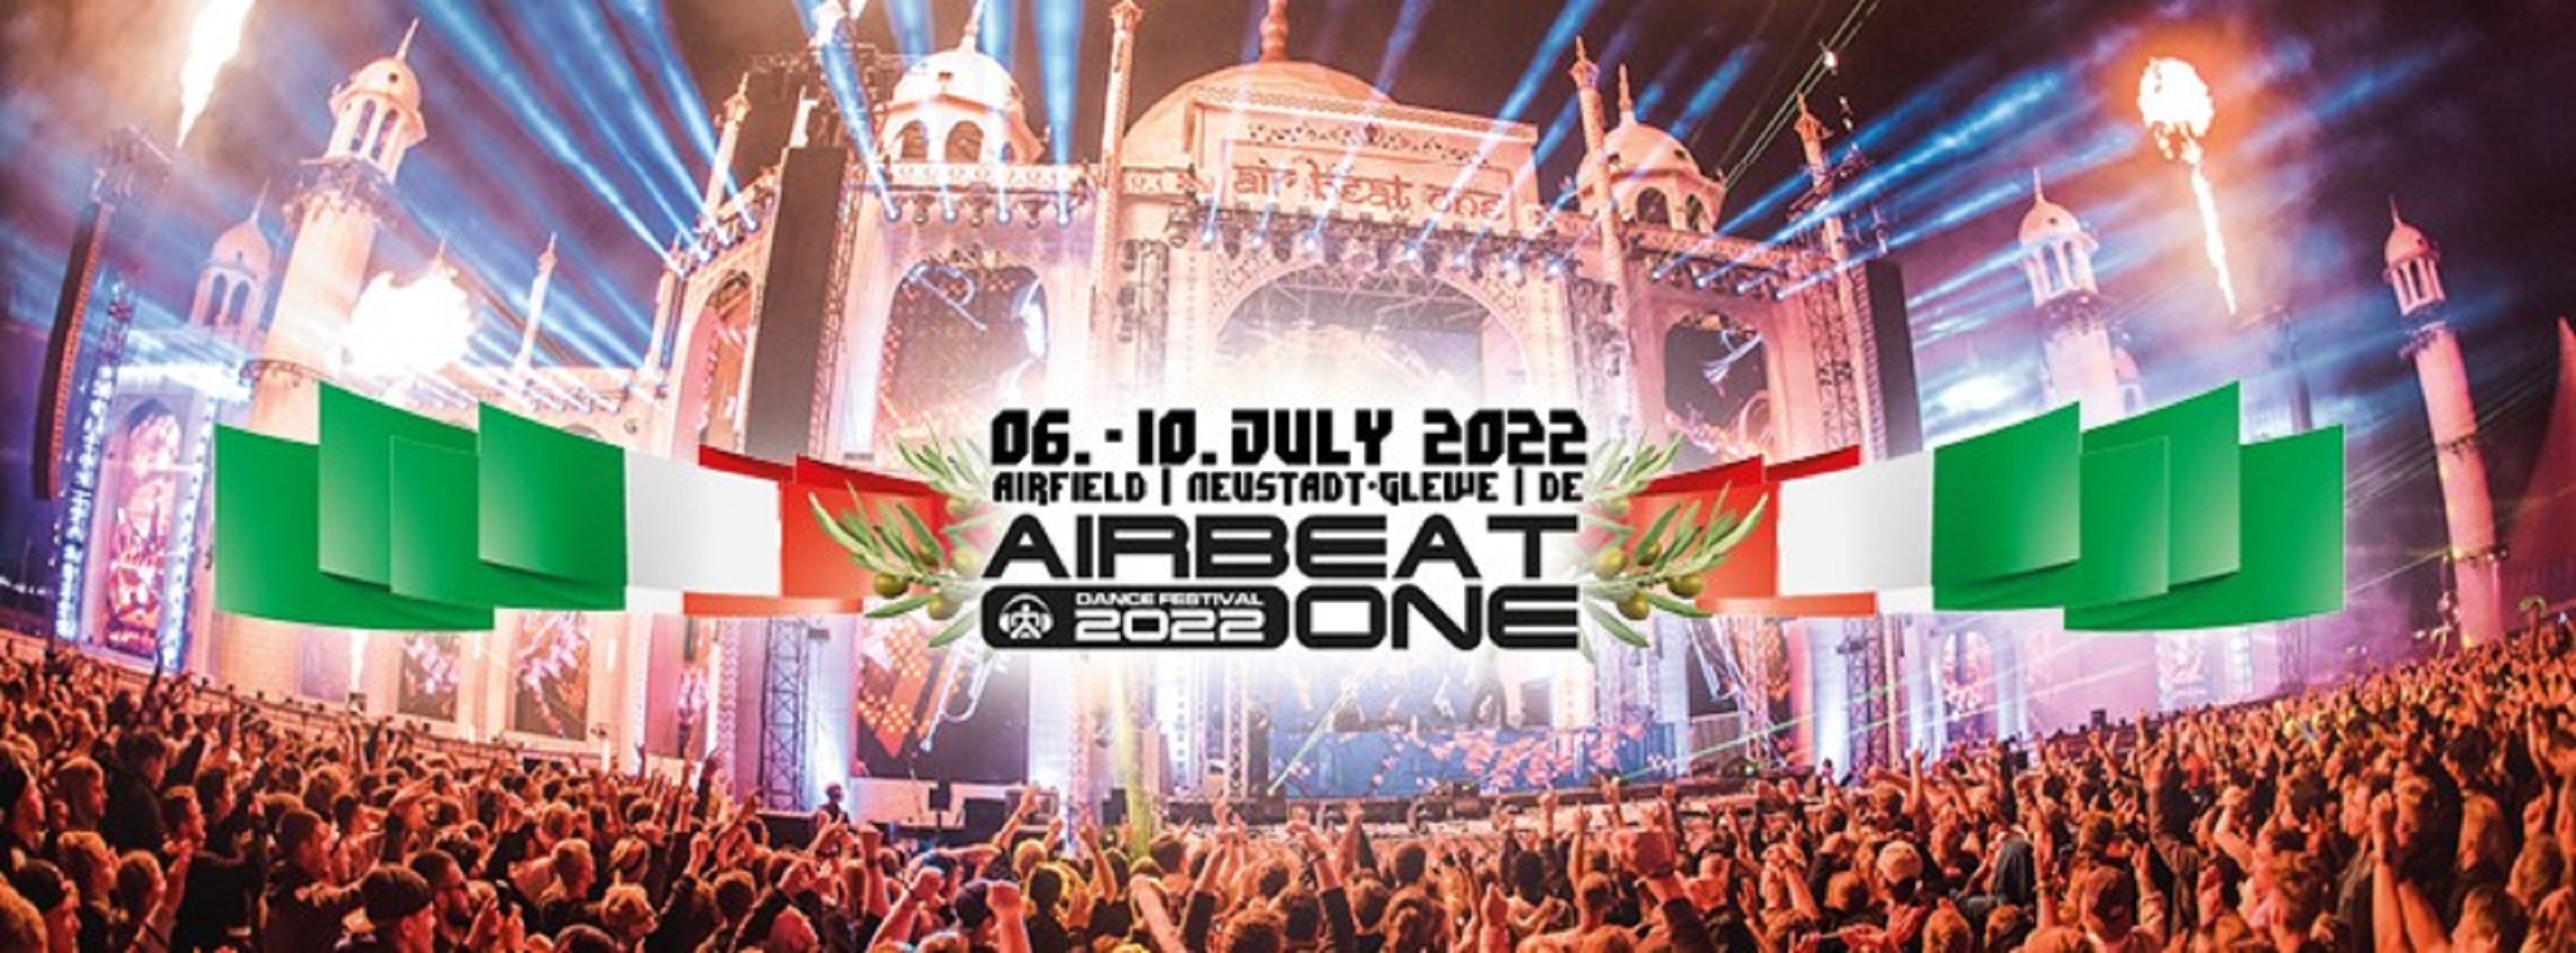 AIRBEAT ONE Festival 2022 releases full line up